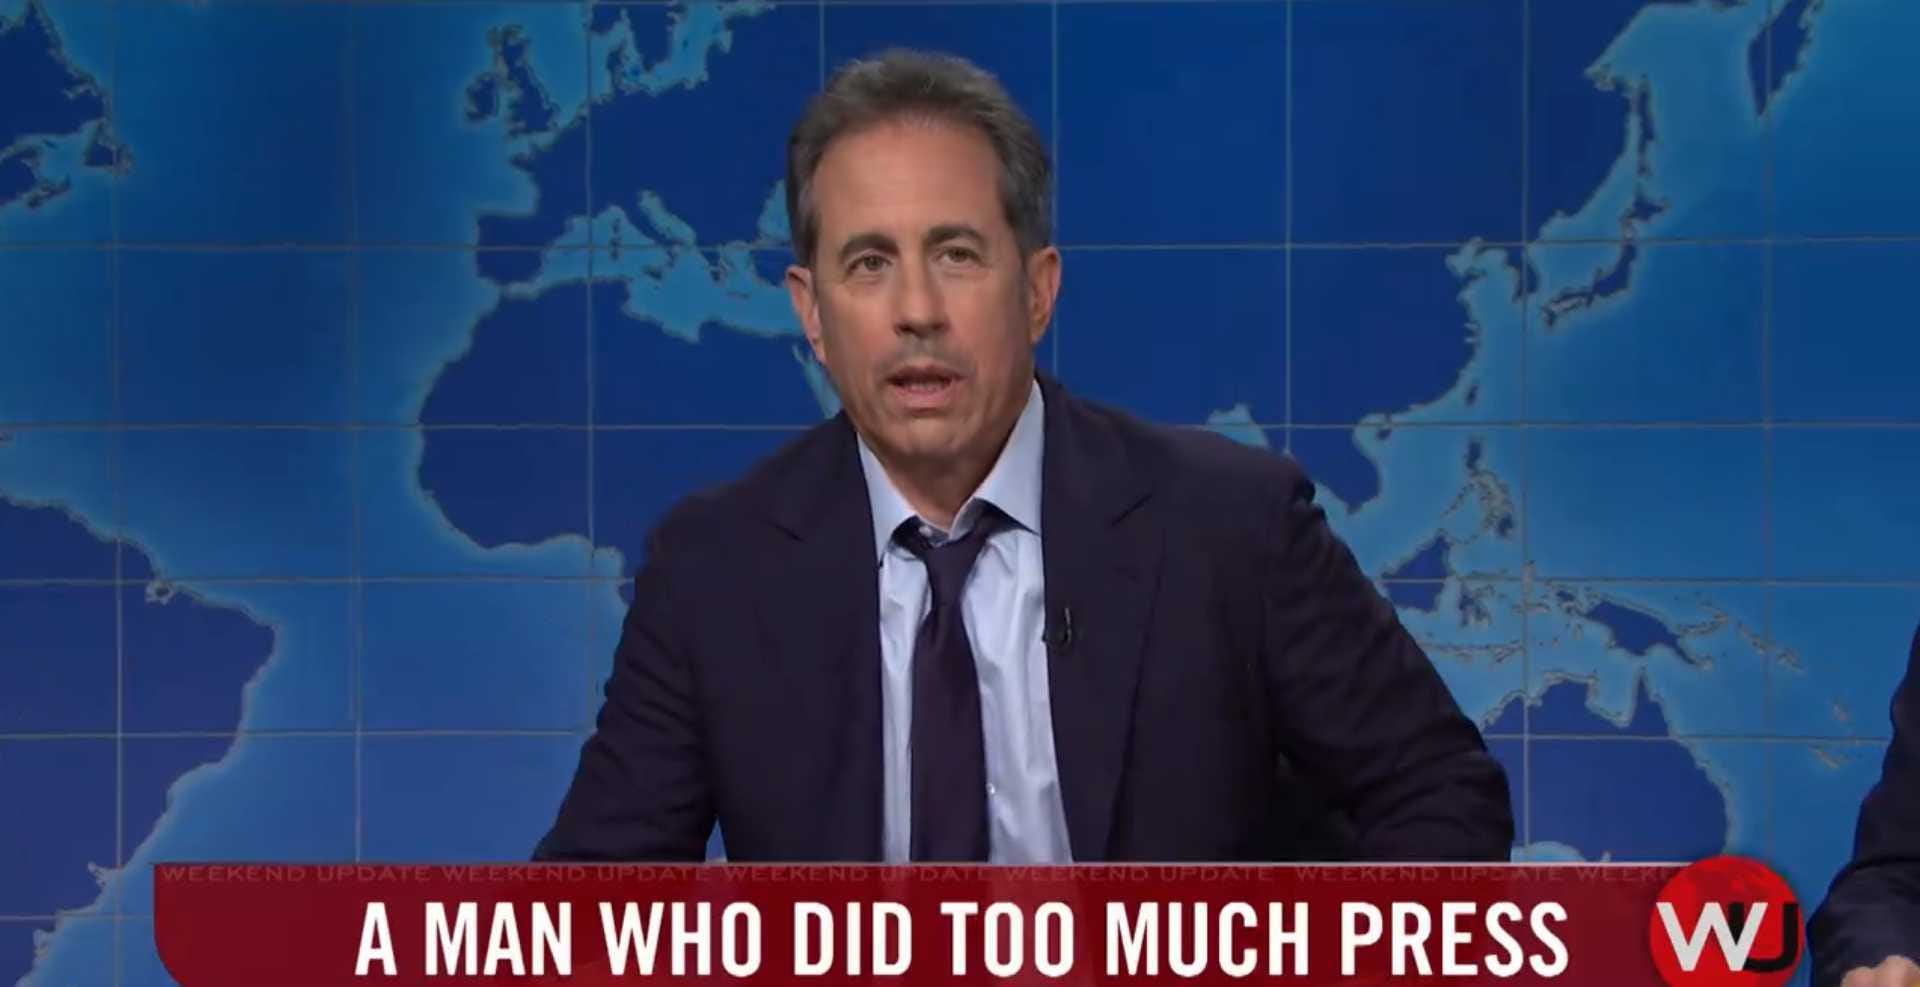 jerry seinfeld did a funny snl weekend update cameo as a man who did too much press